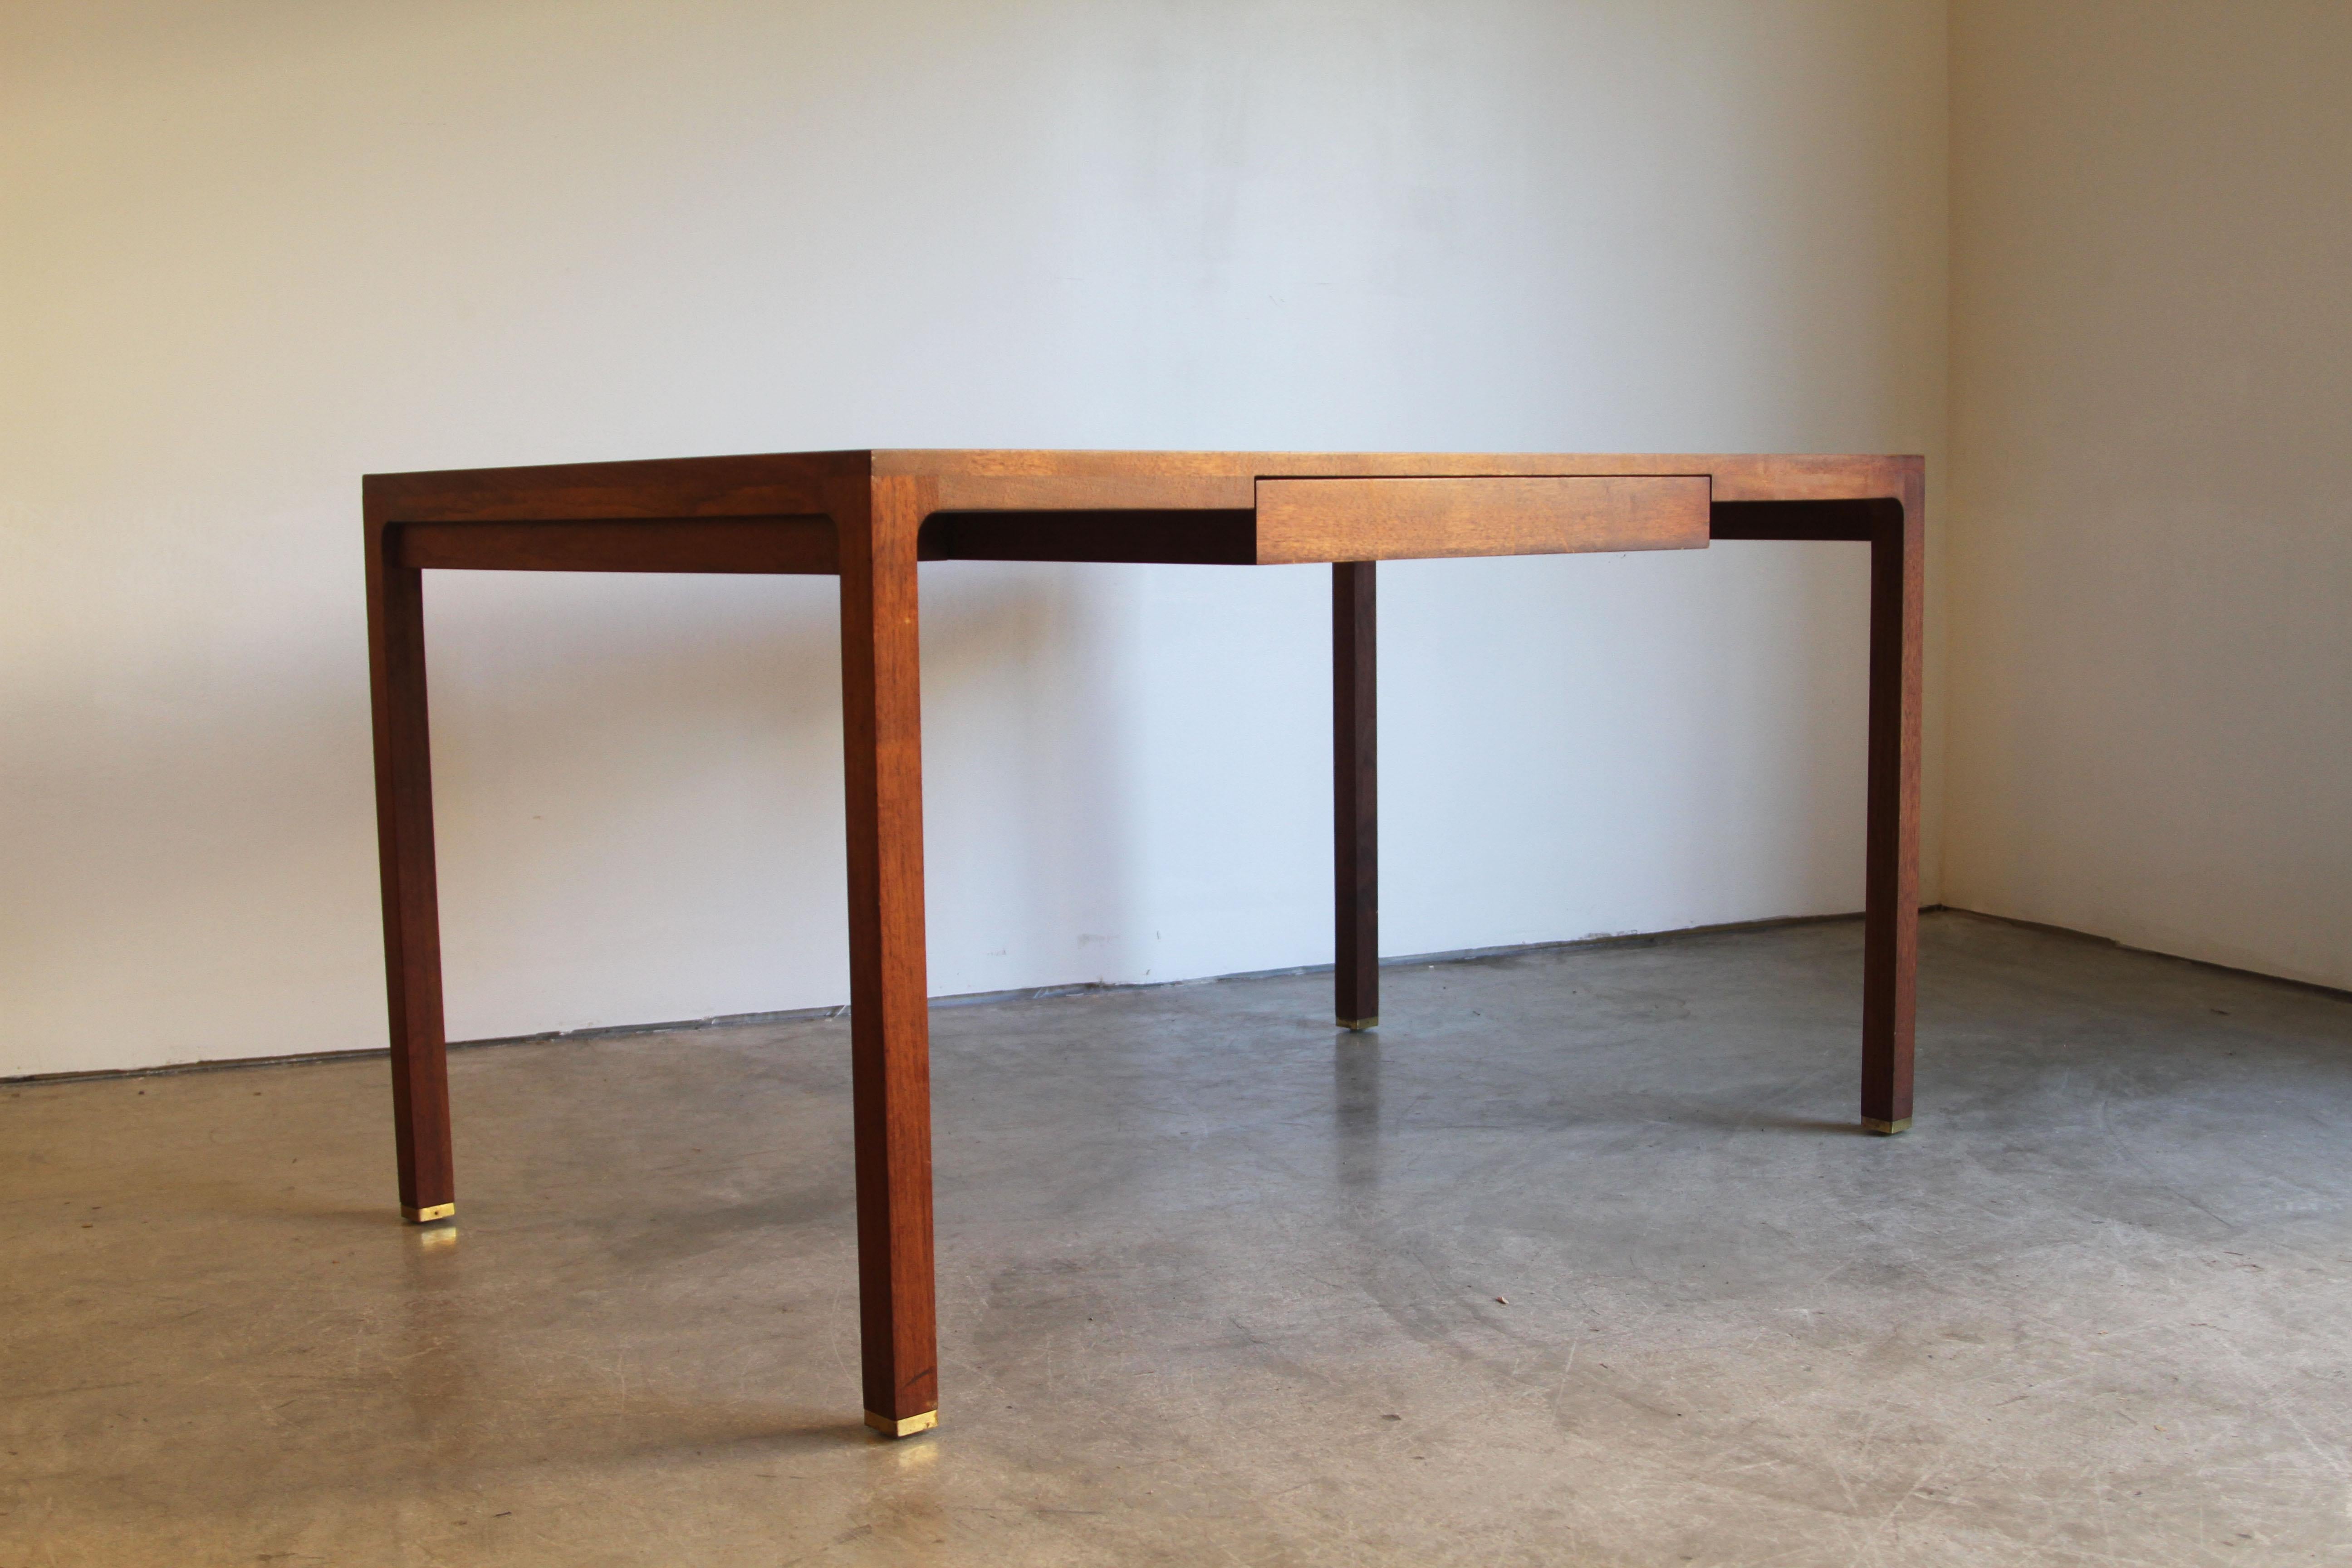 Designer: Unkown
Manufacture: Dunbar 
Period/style: Mid-Century Modern 
Country: US 
Date: 1960s.

Top refinishing recommended. 